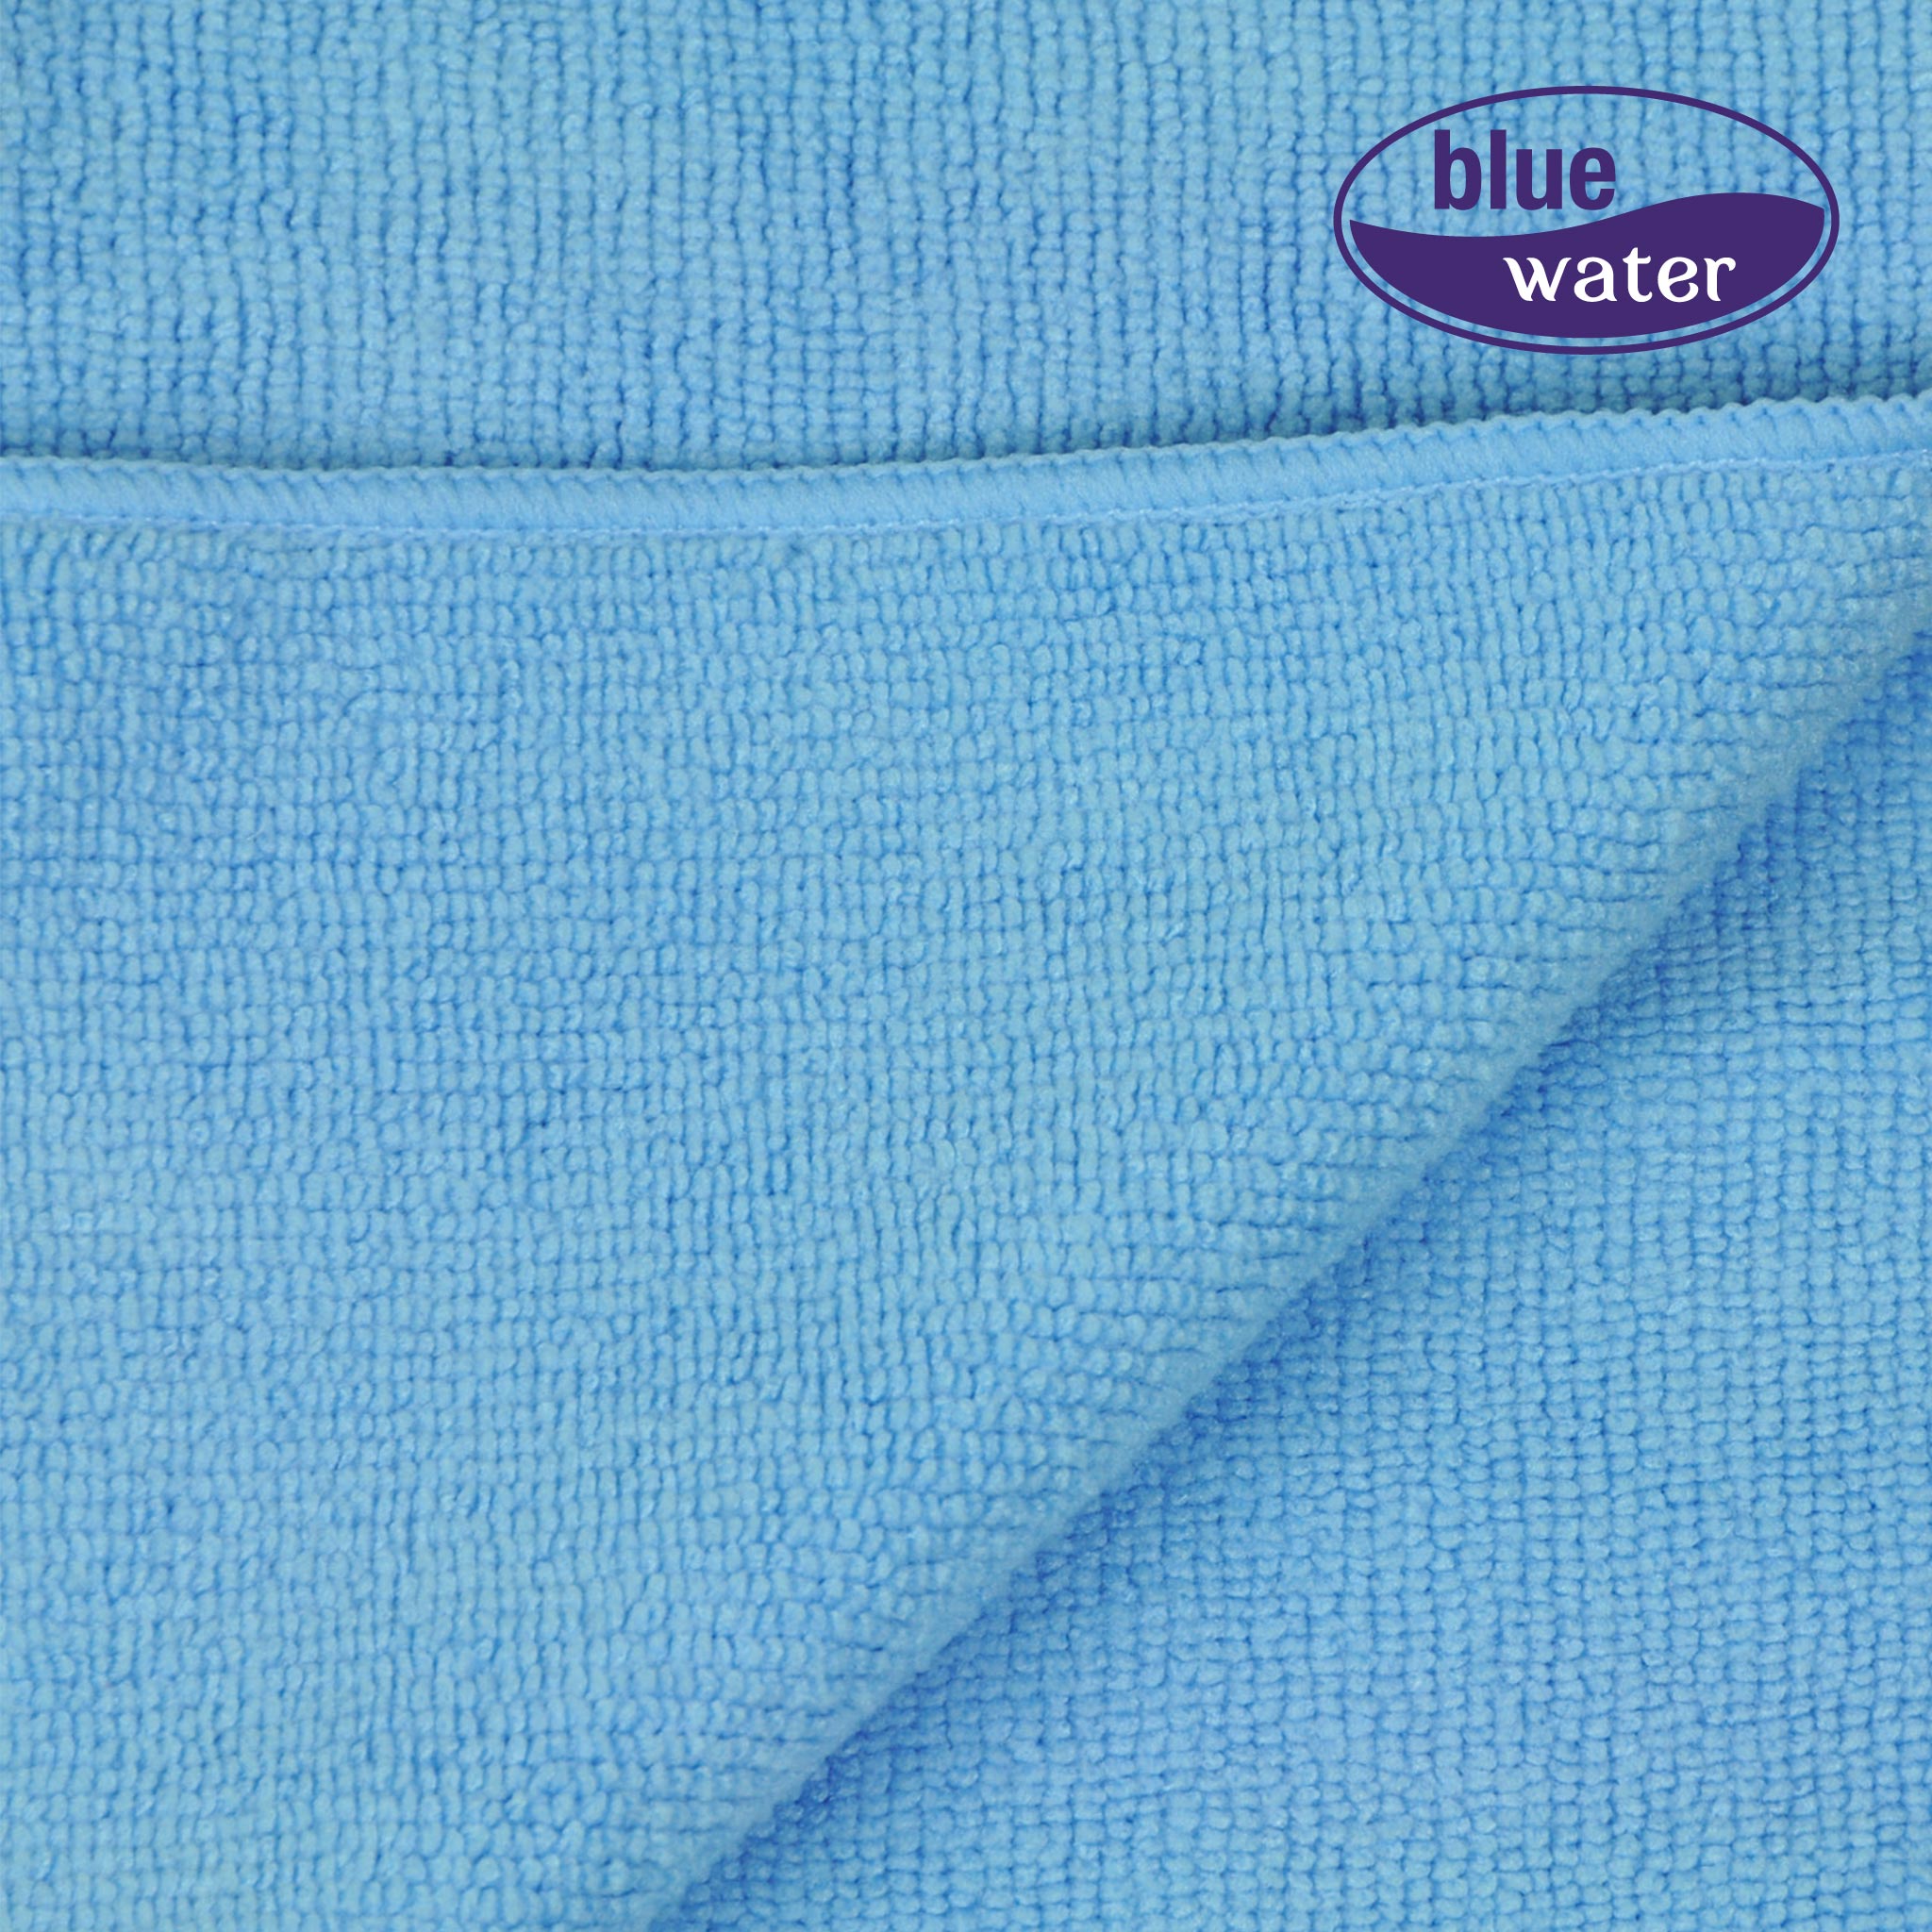 Bluewater Microfibre – Terry Weave